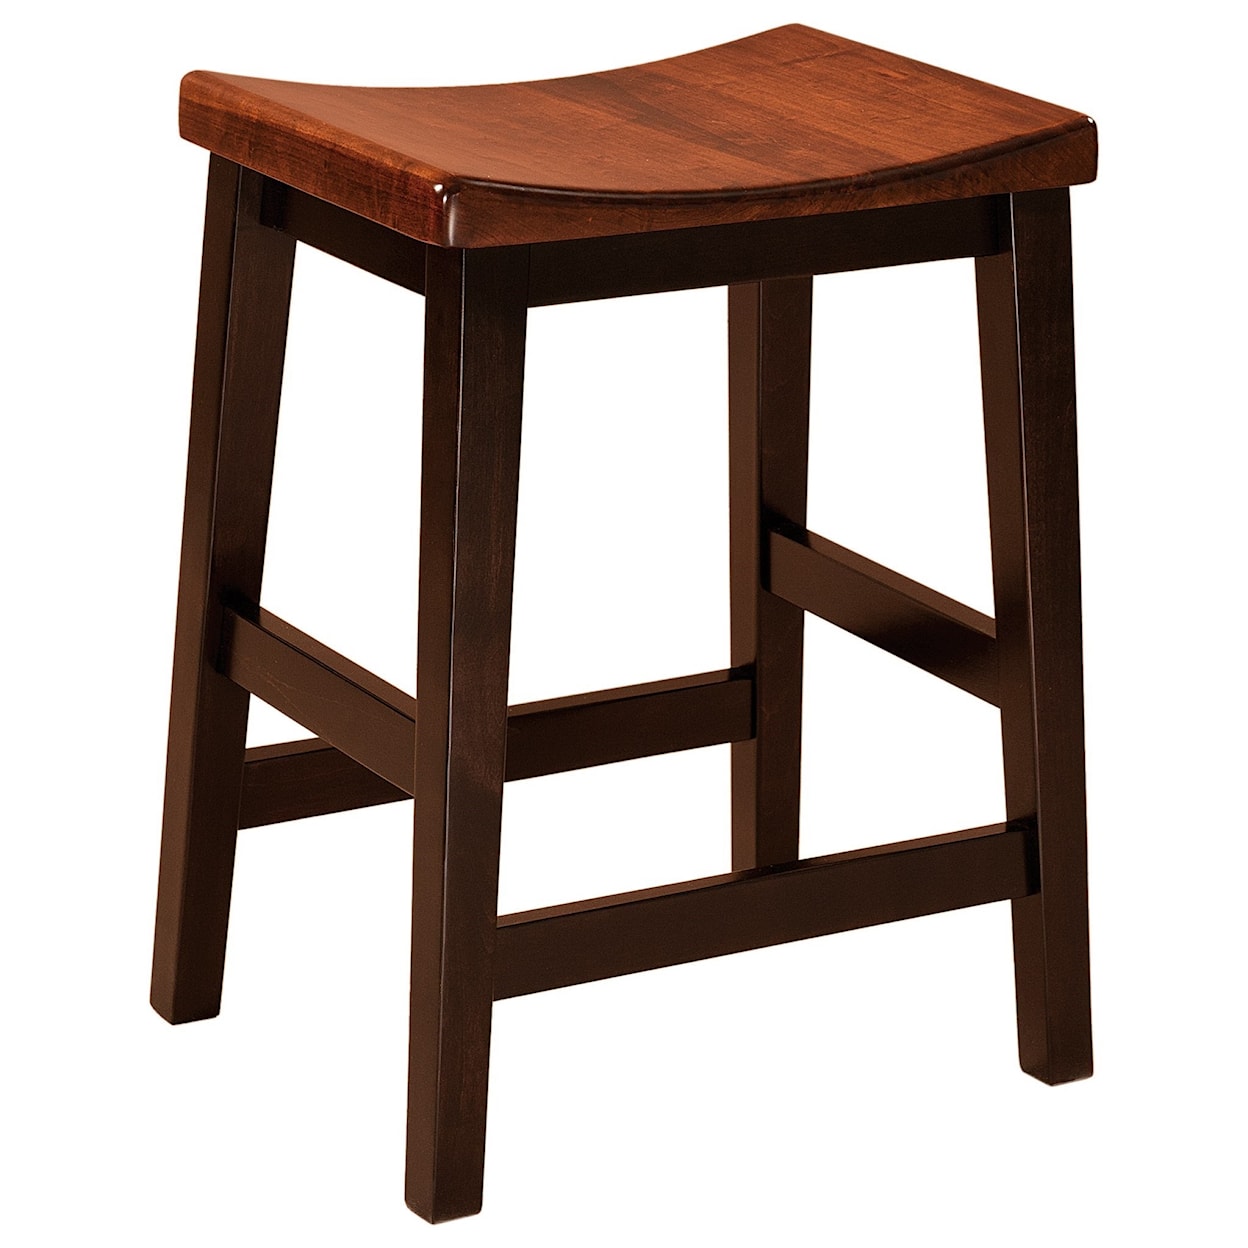 F&N Woodworking Coby Bar Stool 30" Height - Fabric Seat